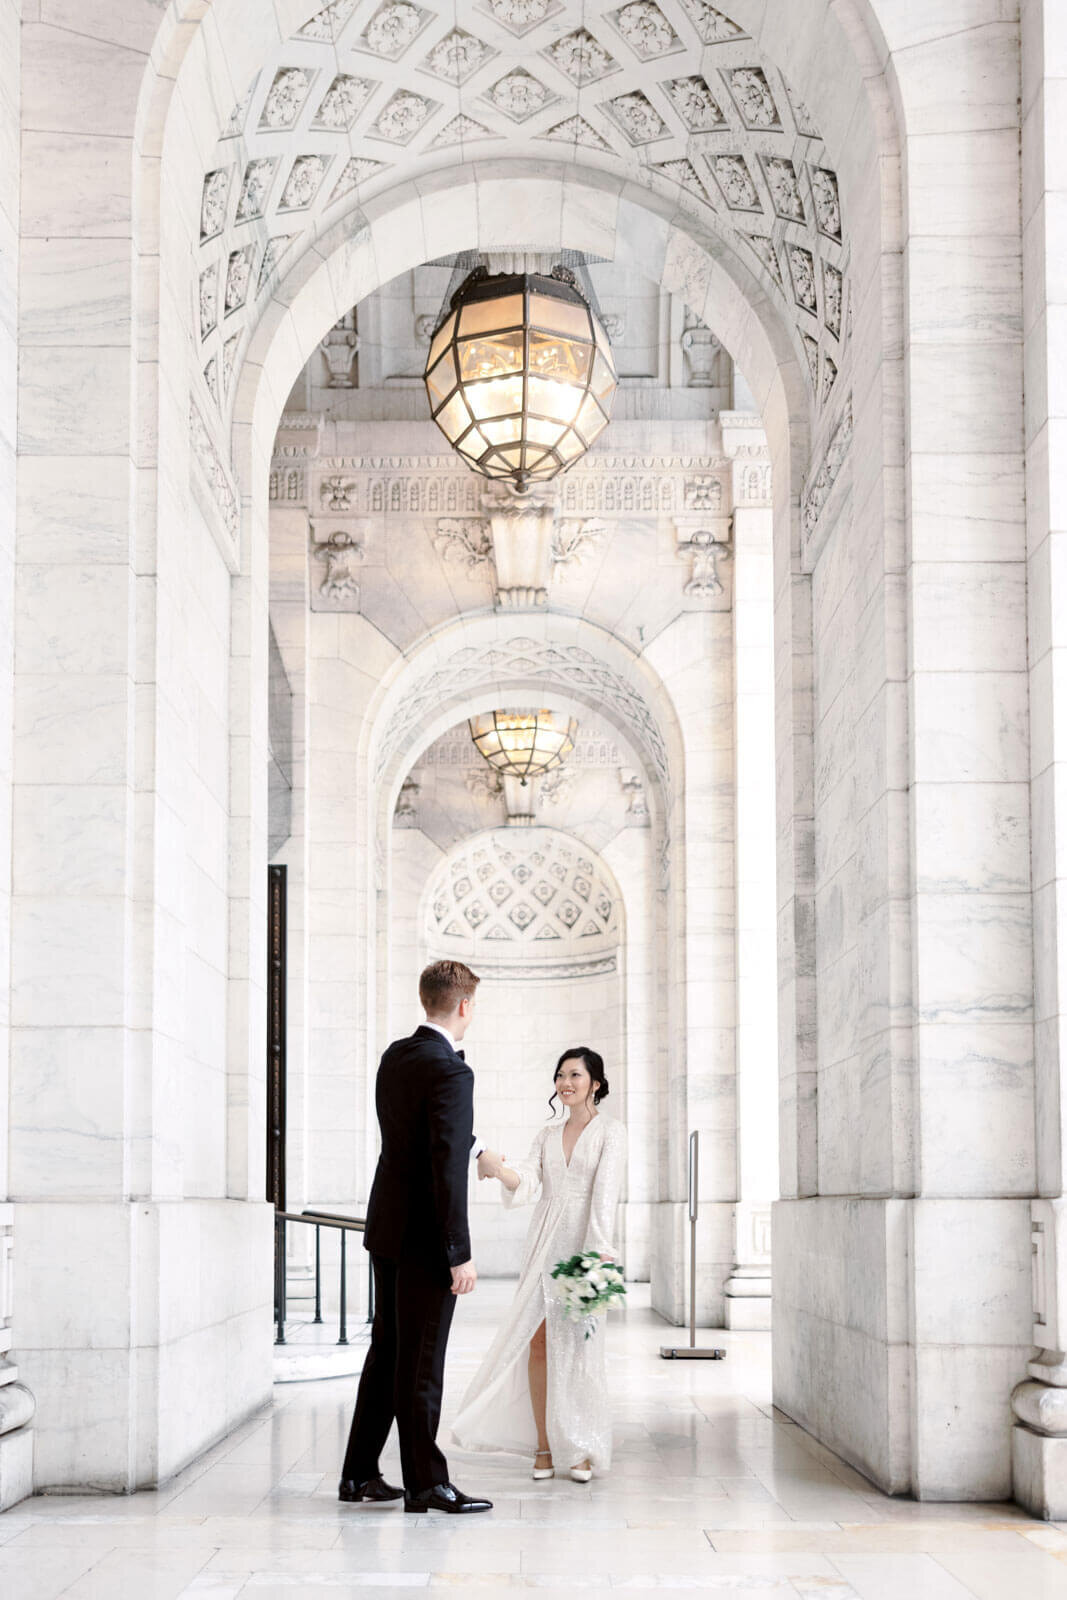 The bride is happily gazing at her groom while dancing in the hallway of the New York Public Library, NYC. Image by Jenny Fu Studio